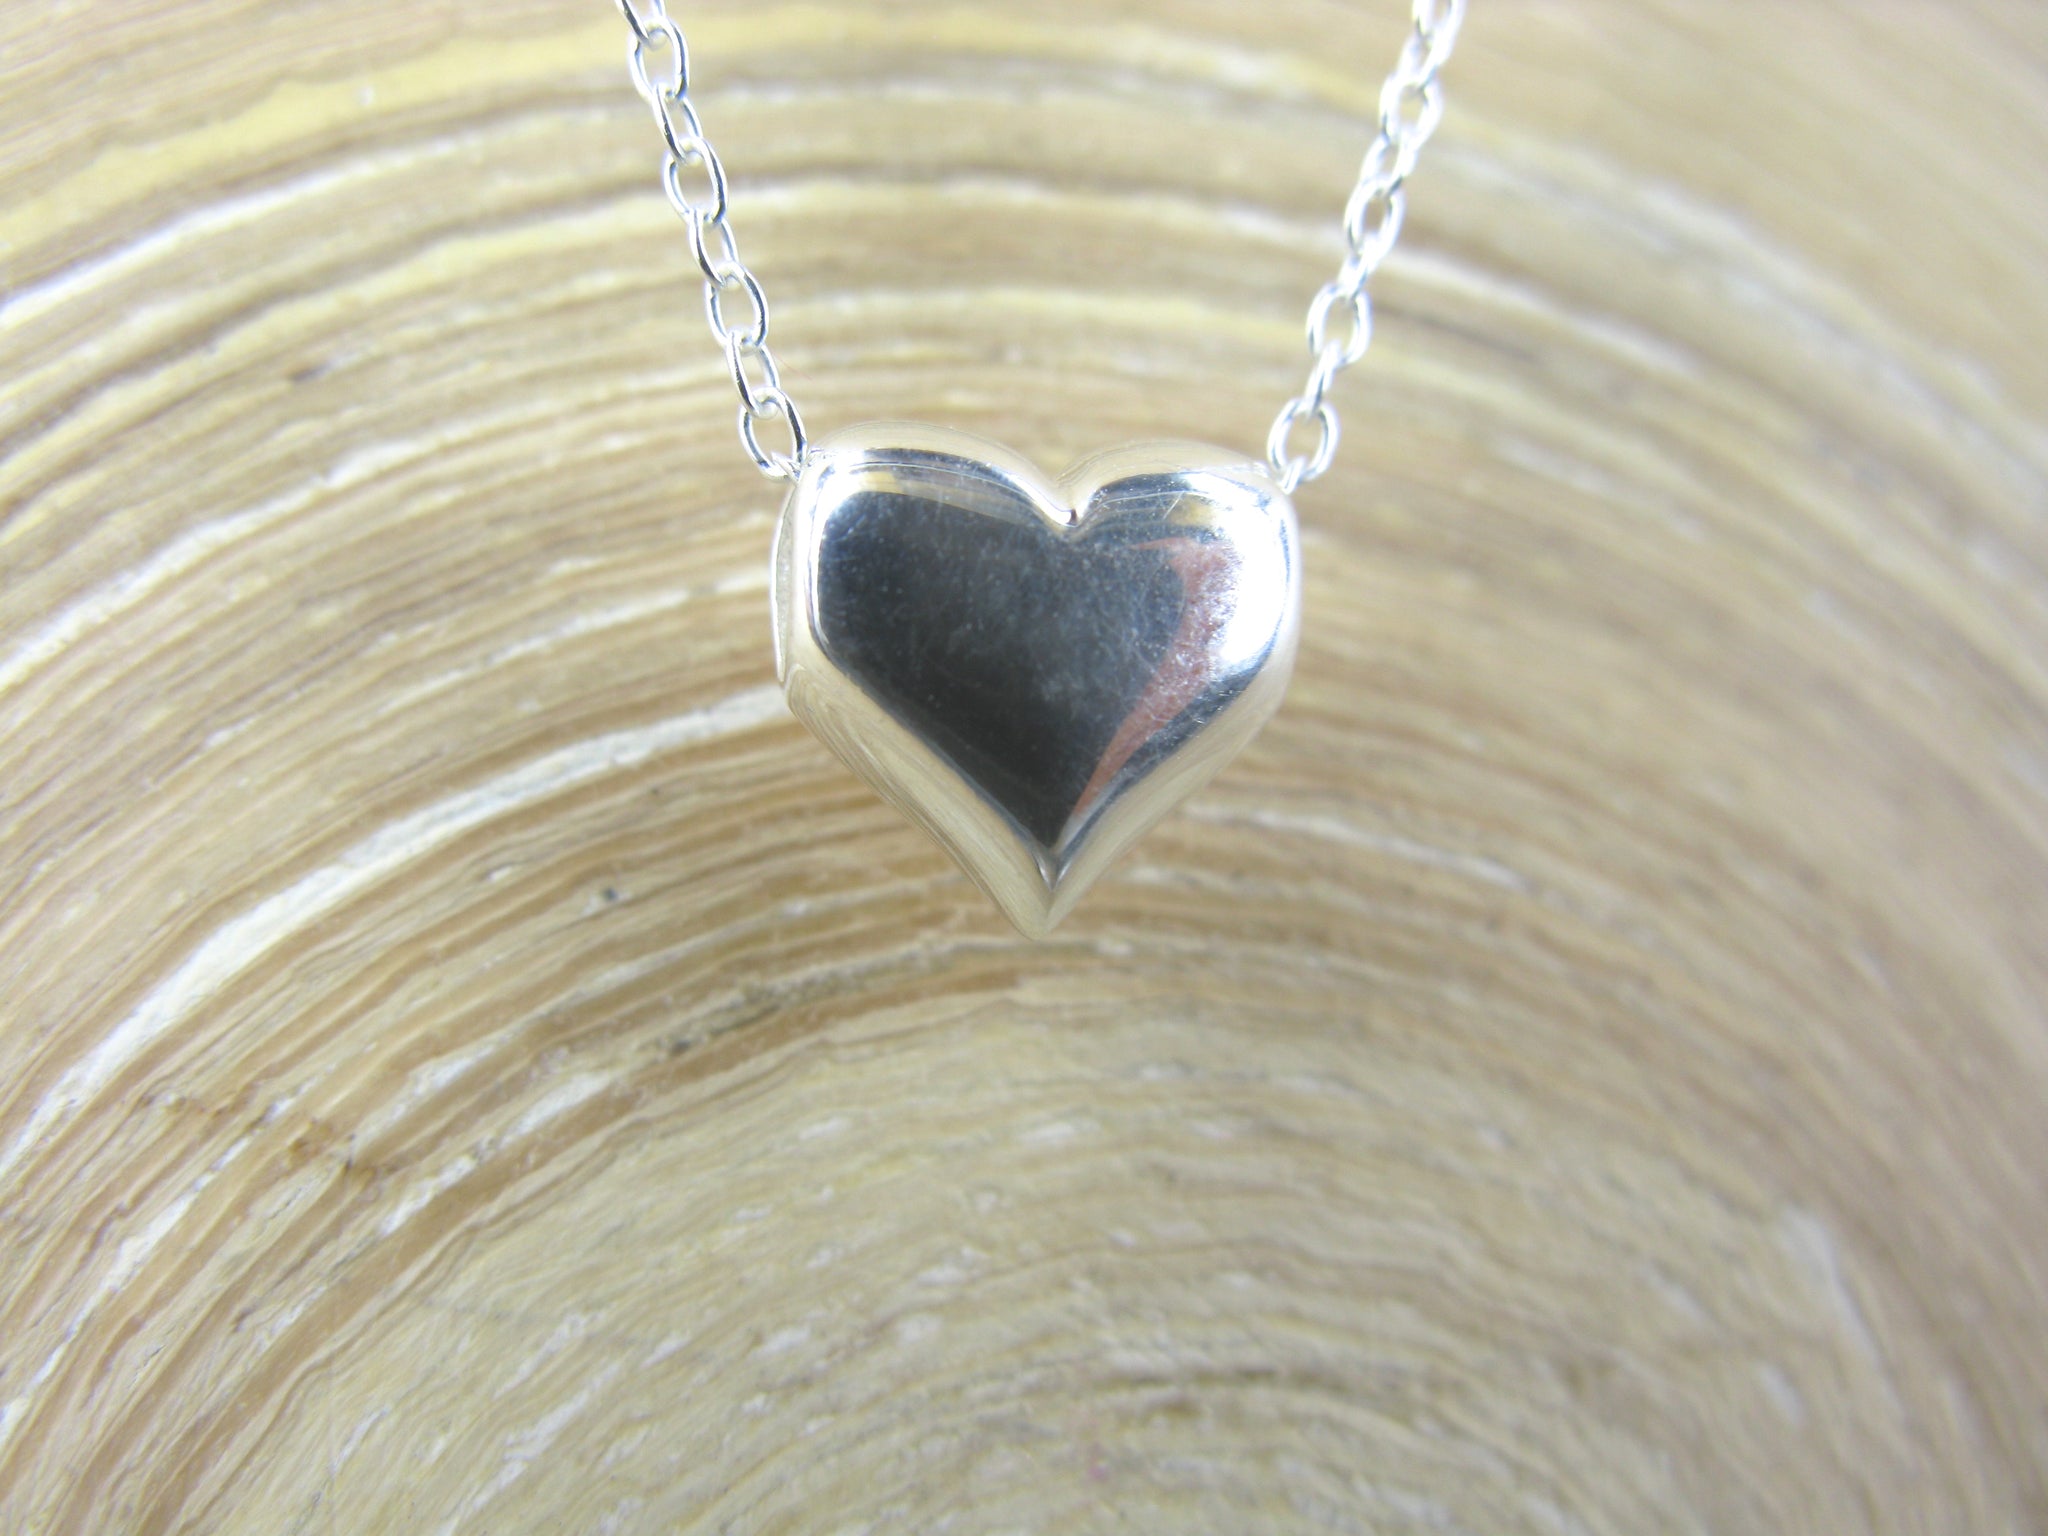 3D Heart Pendant Necklace in 925 Sterling Silver